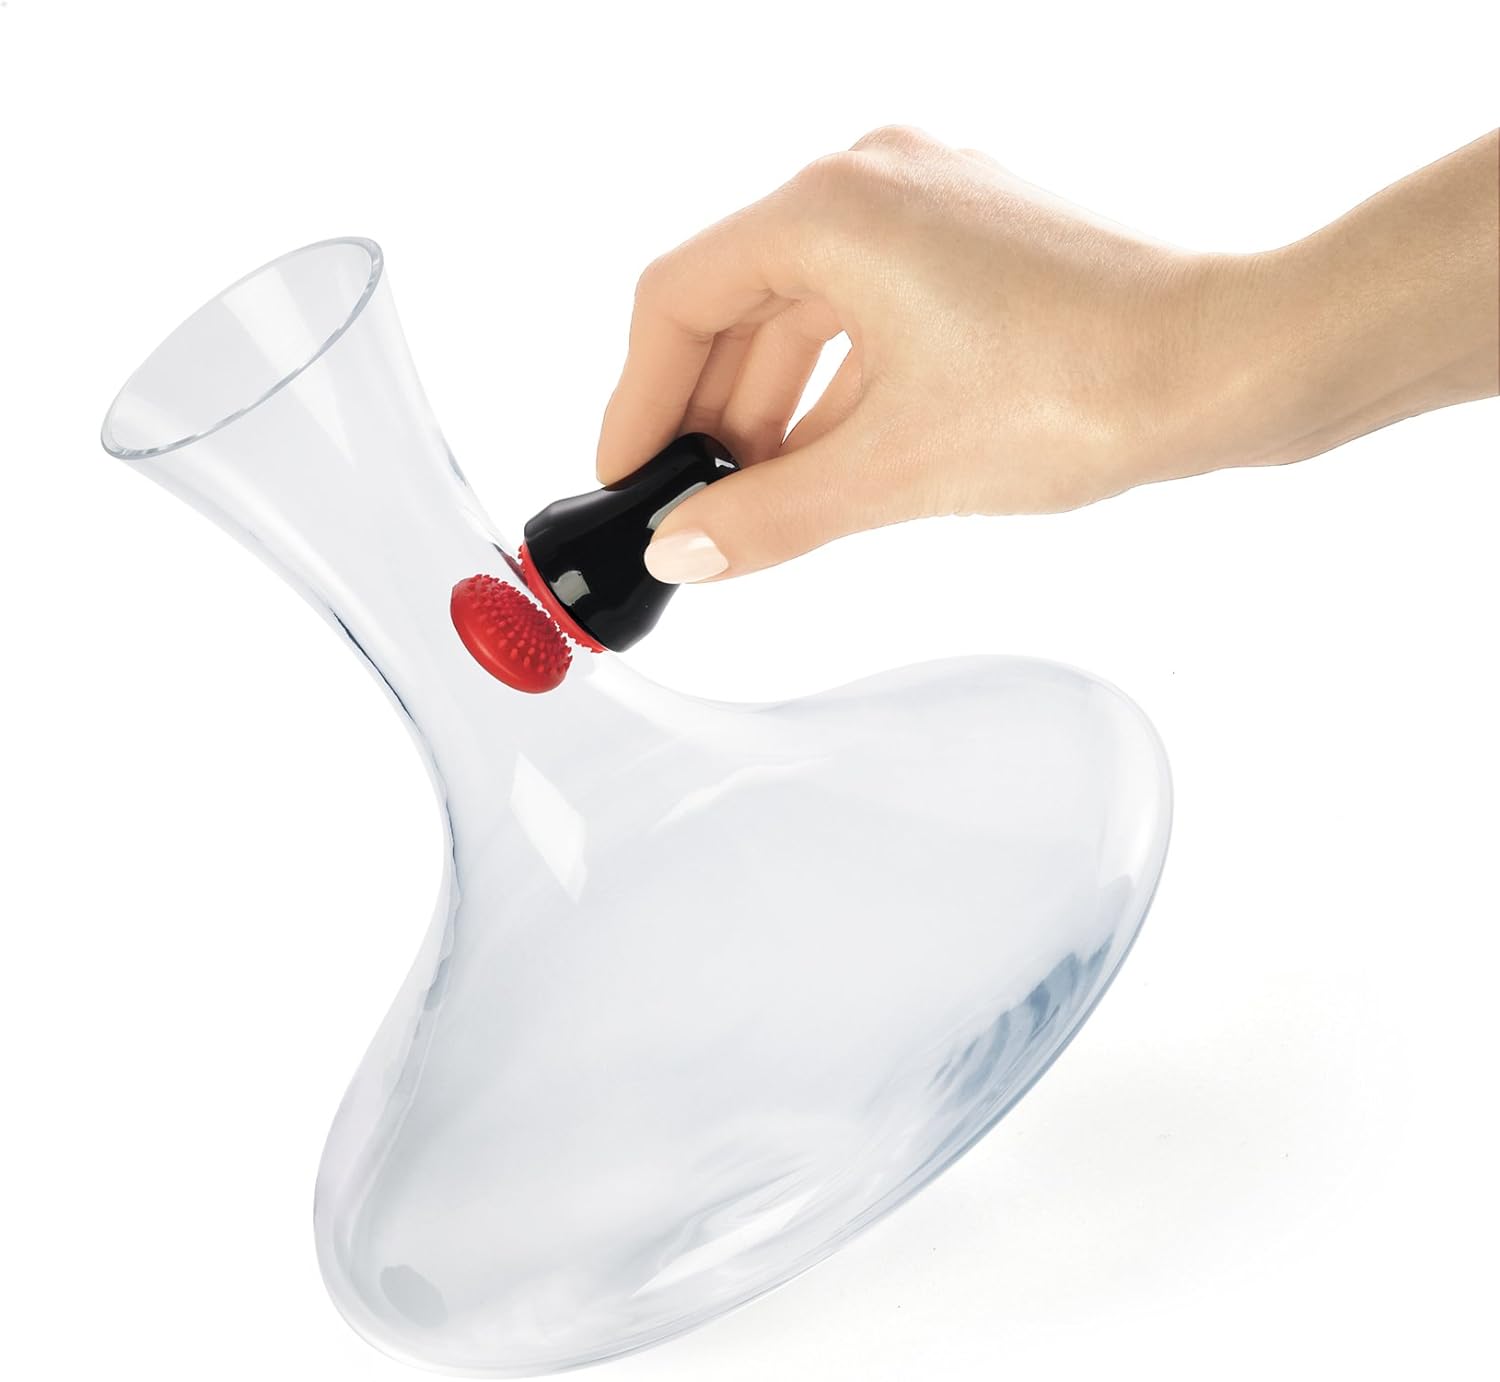 A hand uses the Cuisipro-Magnetic-Spot-Scrubber to clean the inside of a glass vase.